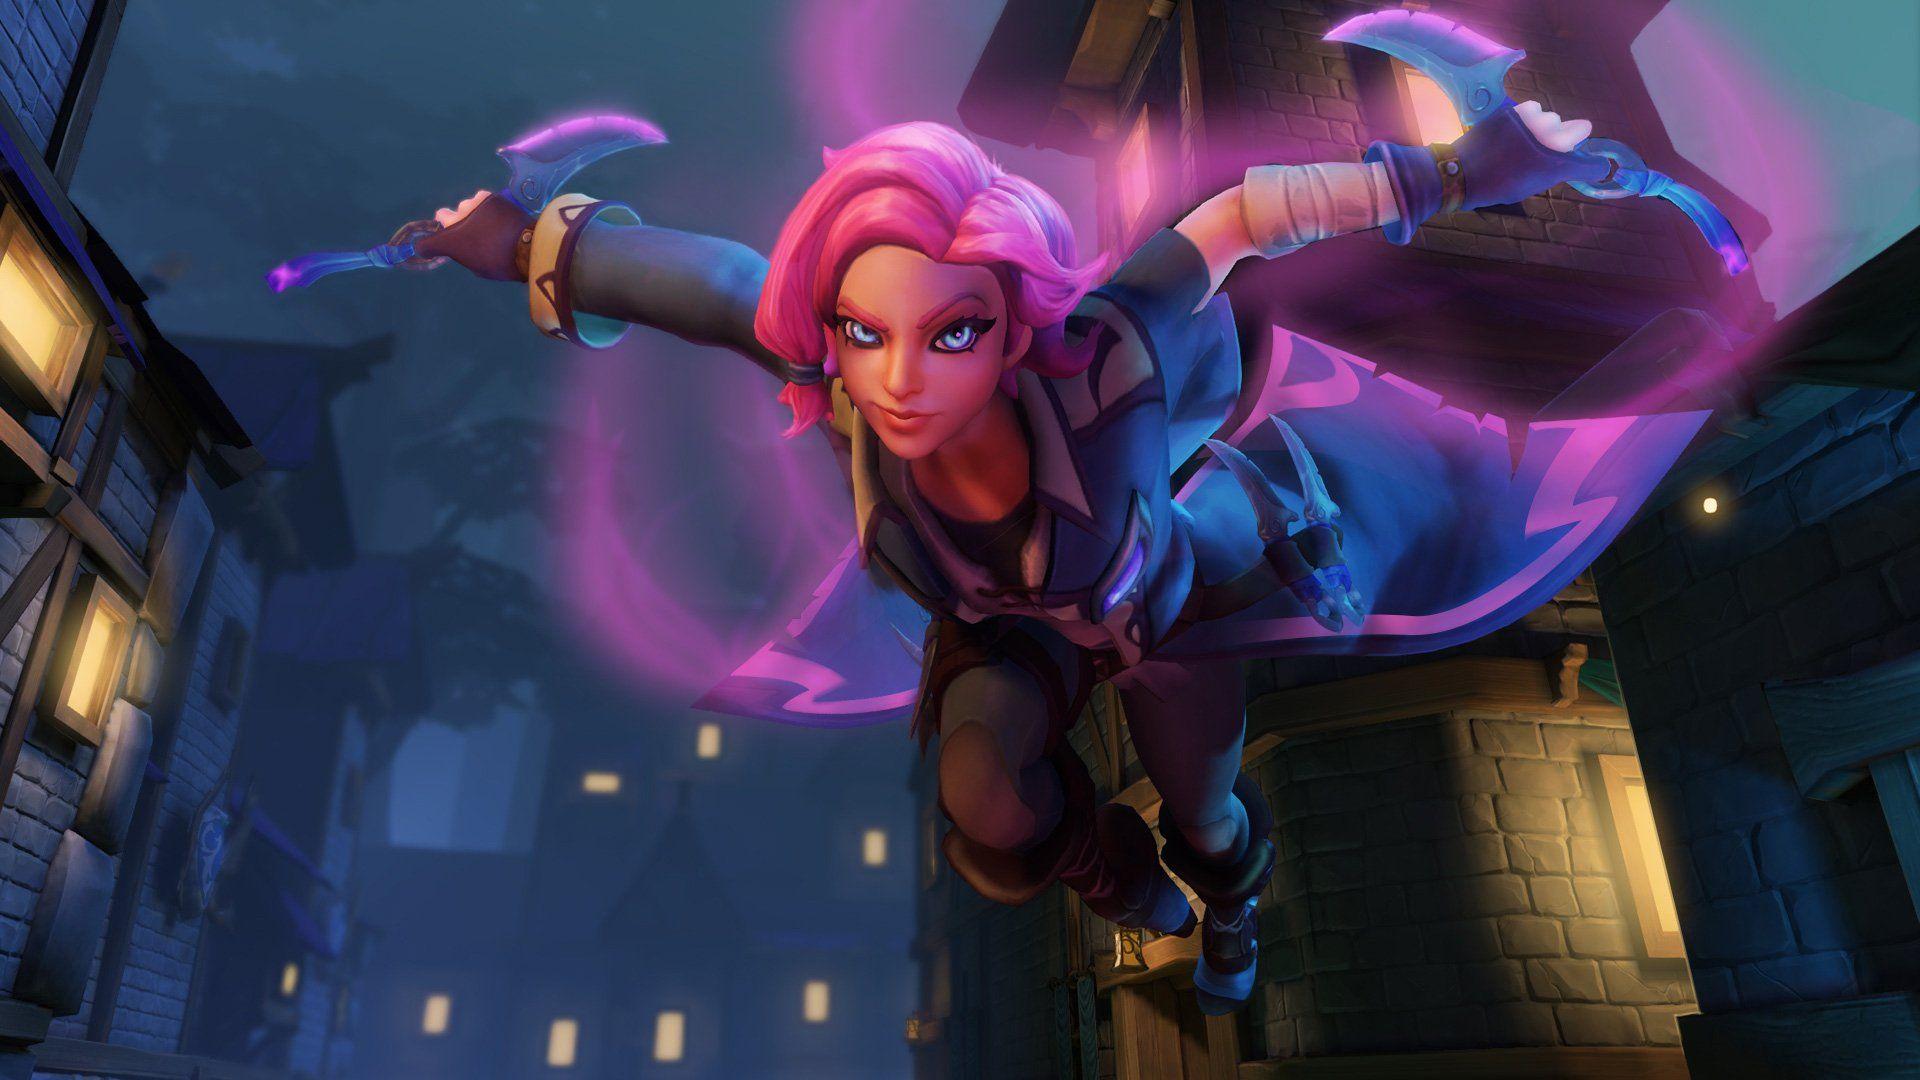 Maeve From Paladins